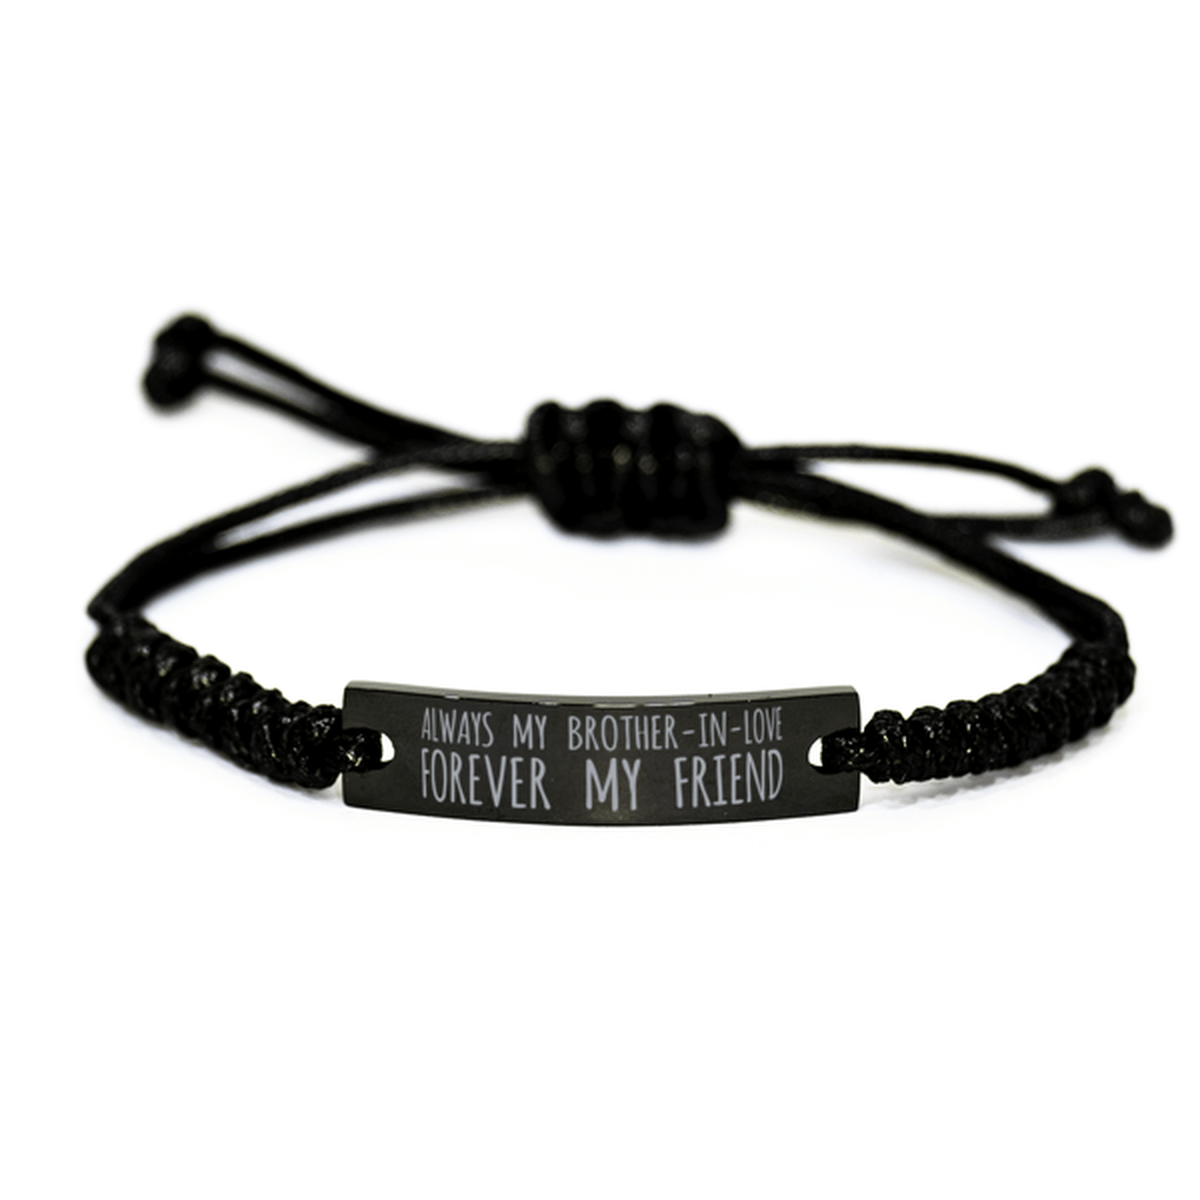 Inspirational Brother-In-Love Black Rope Bracelet, Always My Brother-In-Love Forever My Friend, Best Birthday Gifts For Family